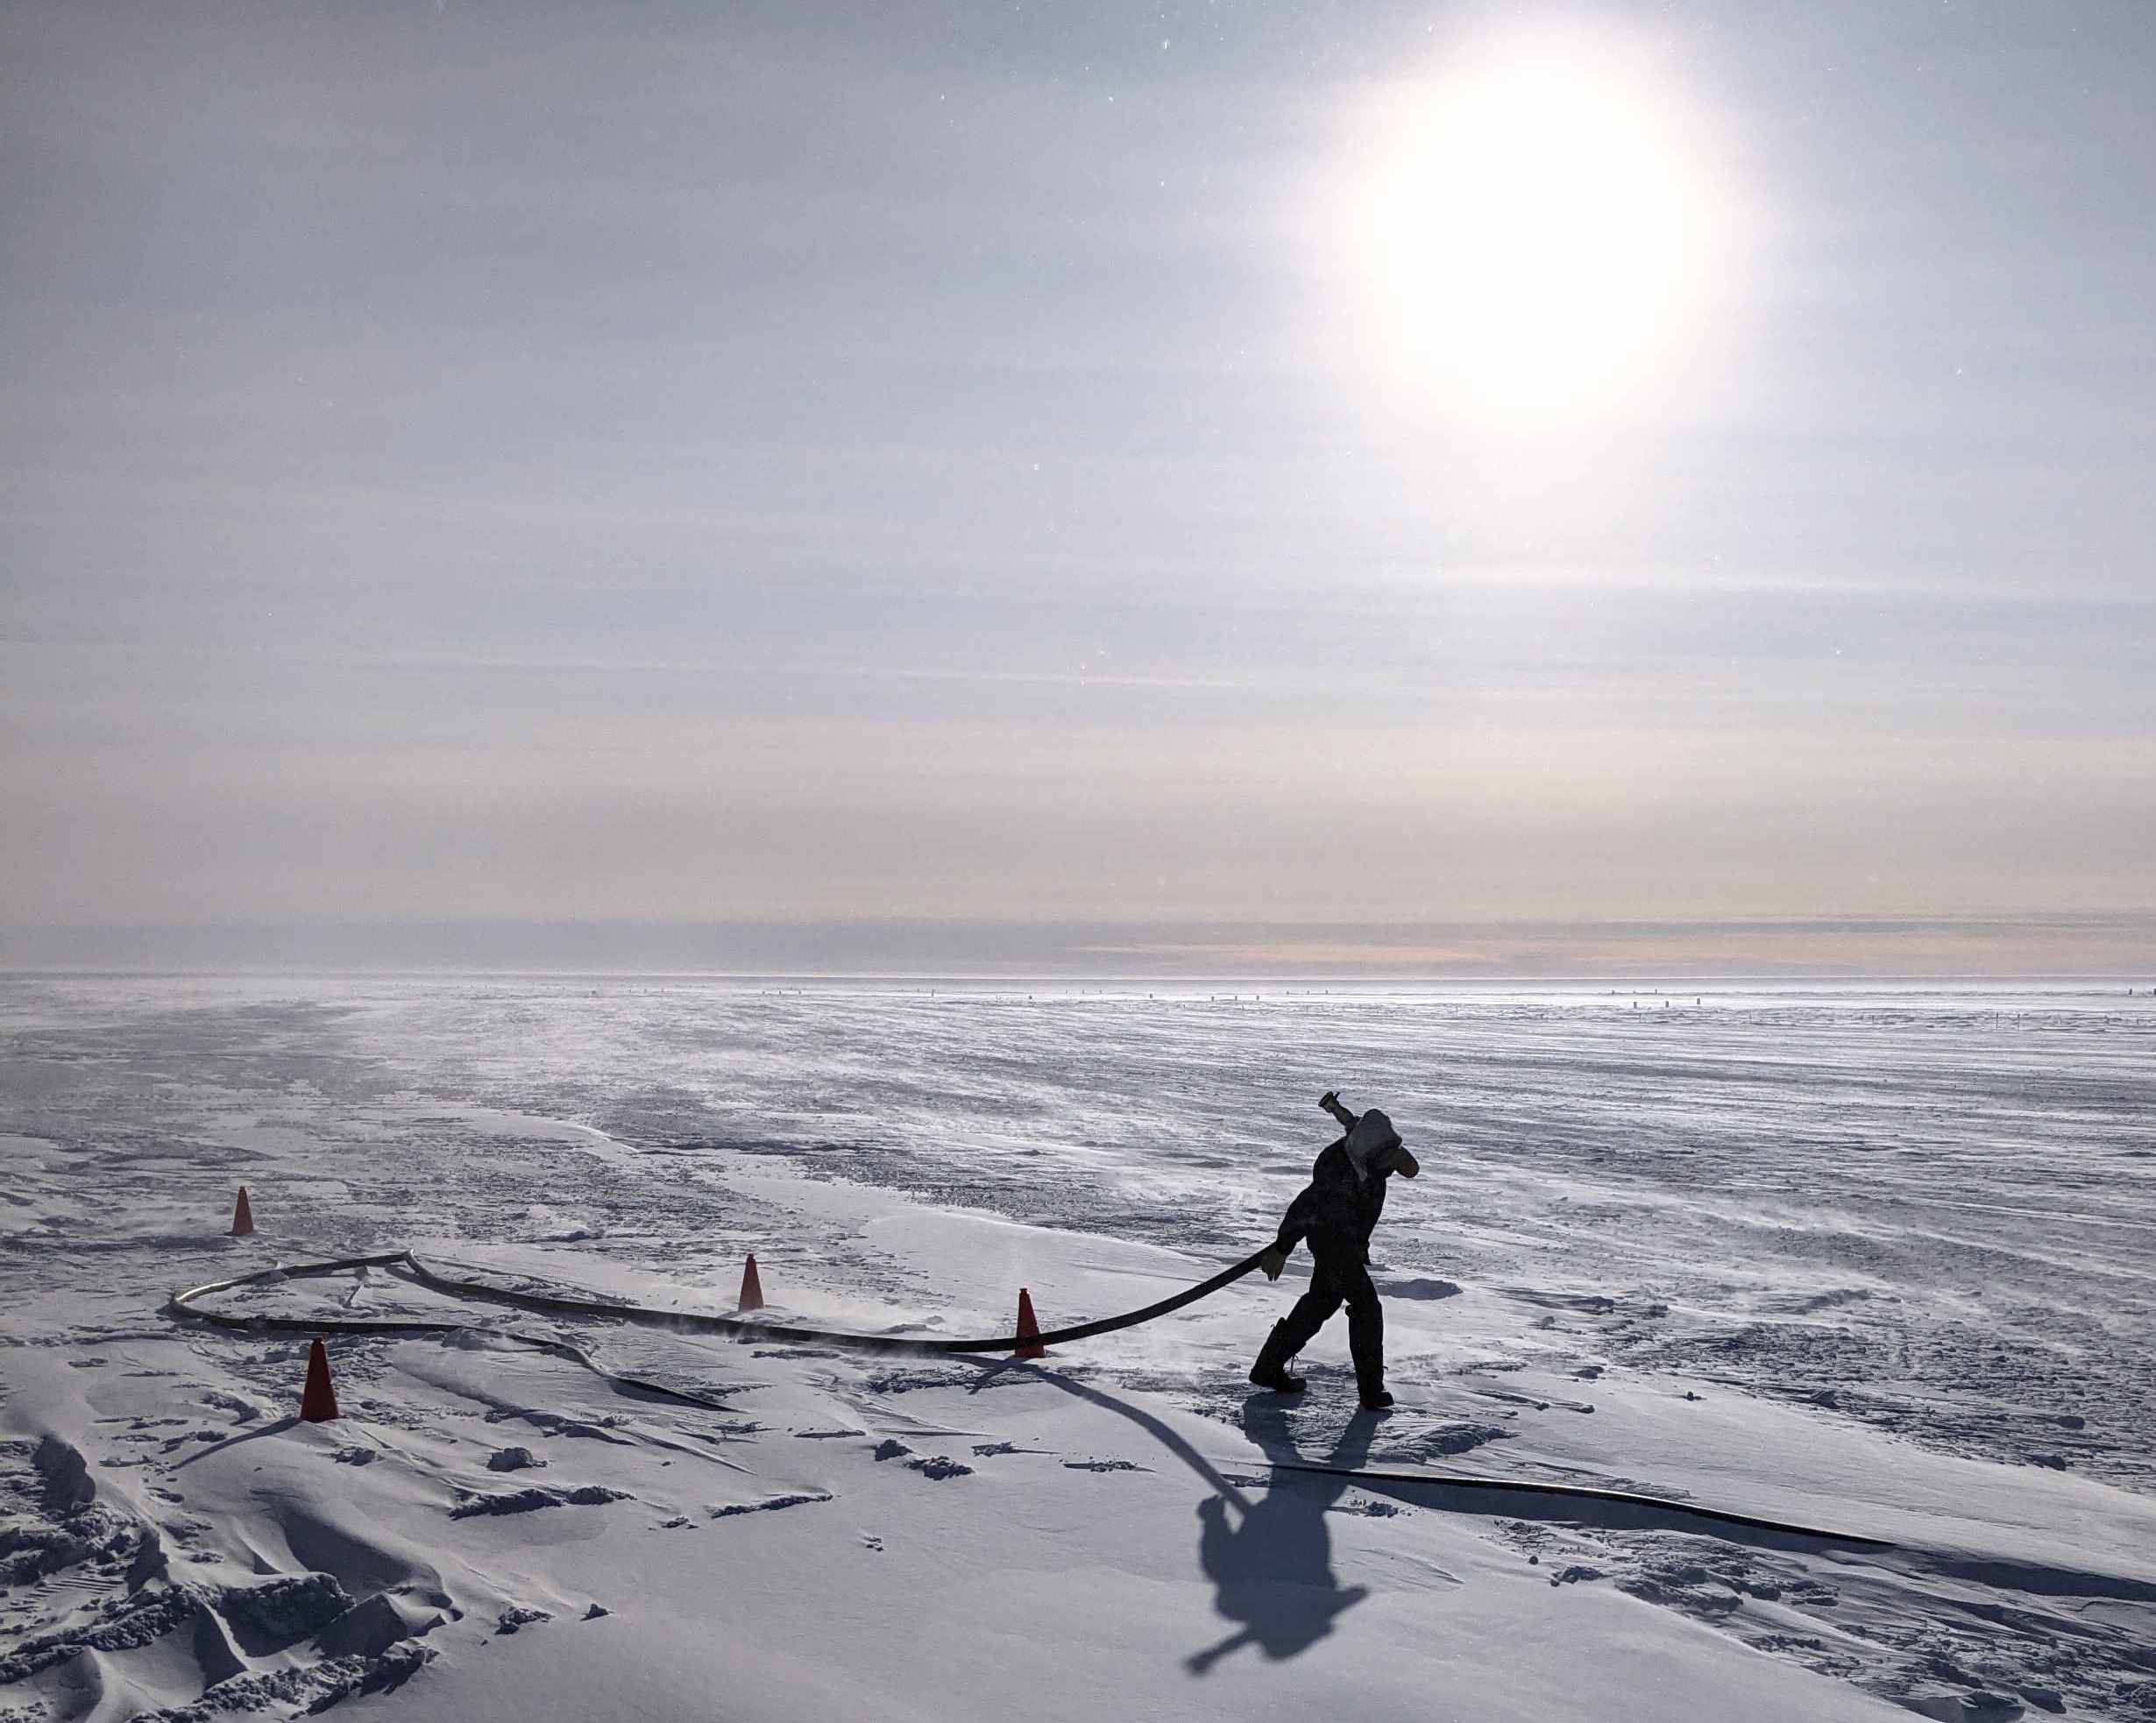 Person hauling large fuel hose out on the South Pole ice.